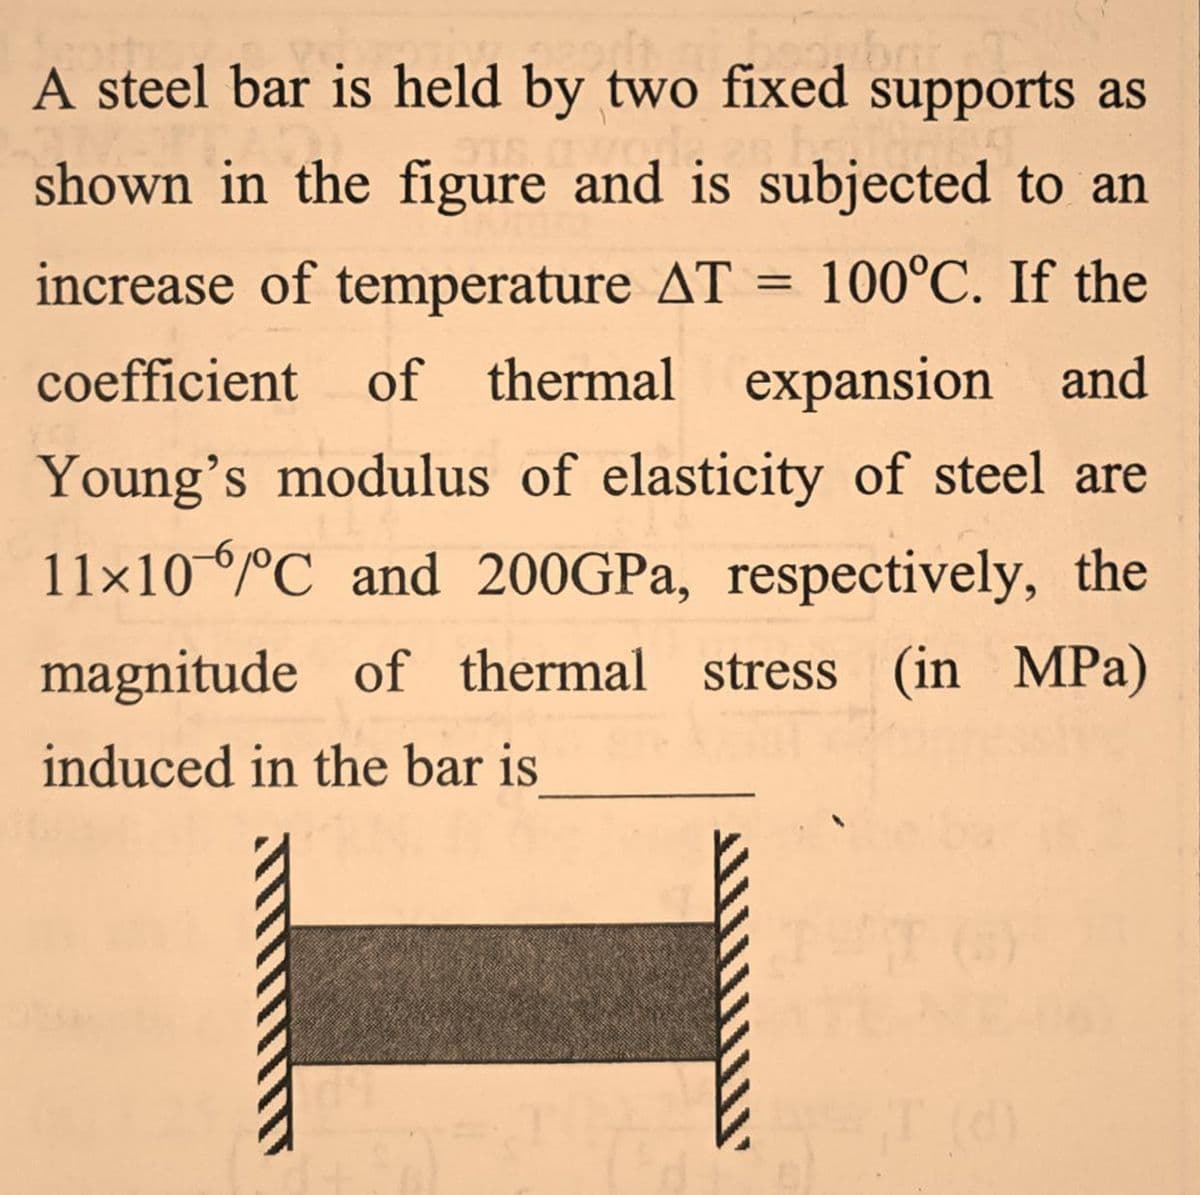 A steel bar is held by two fixed supports as
shown in the figure and is subjected to an
increase of temperature AT
100°C. If the
coefficient of thermal expansion and
Young's modulus of elasticity of steel are
11×10°C and 200GPA, respectively, the
magnitude of thermal stress (in MPa)
induced in the bar is
